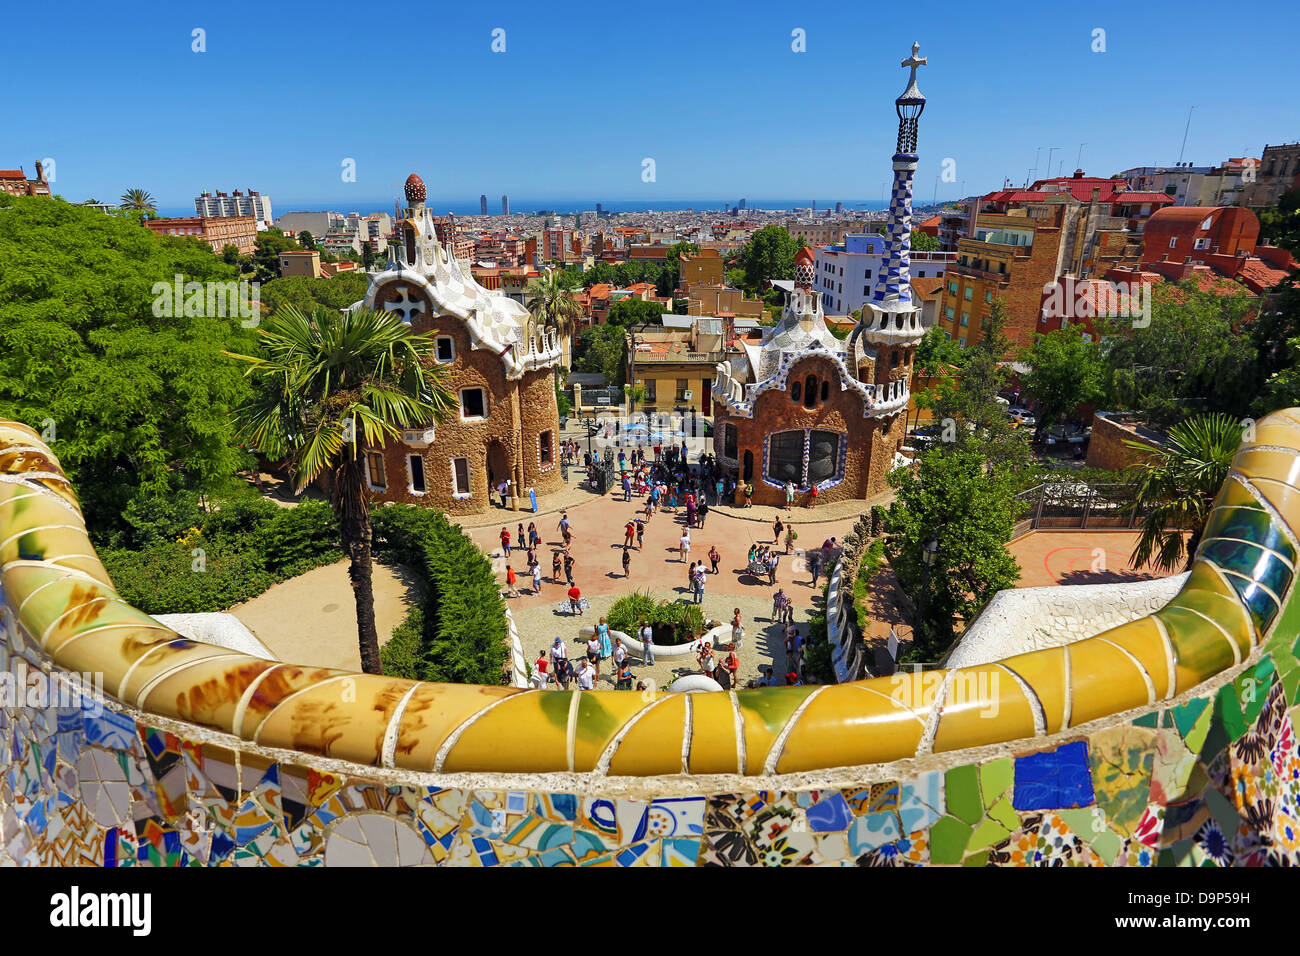 Parc Guell park with architecture deisgned by Antoni Gaudi in Barcelona, Spain Stock Photo